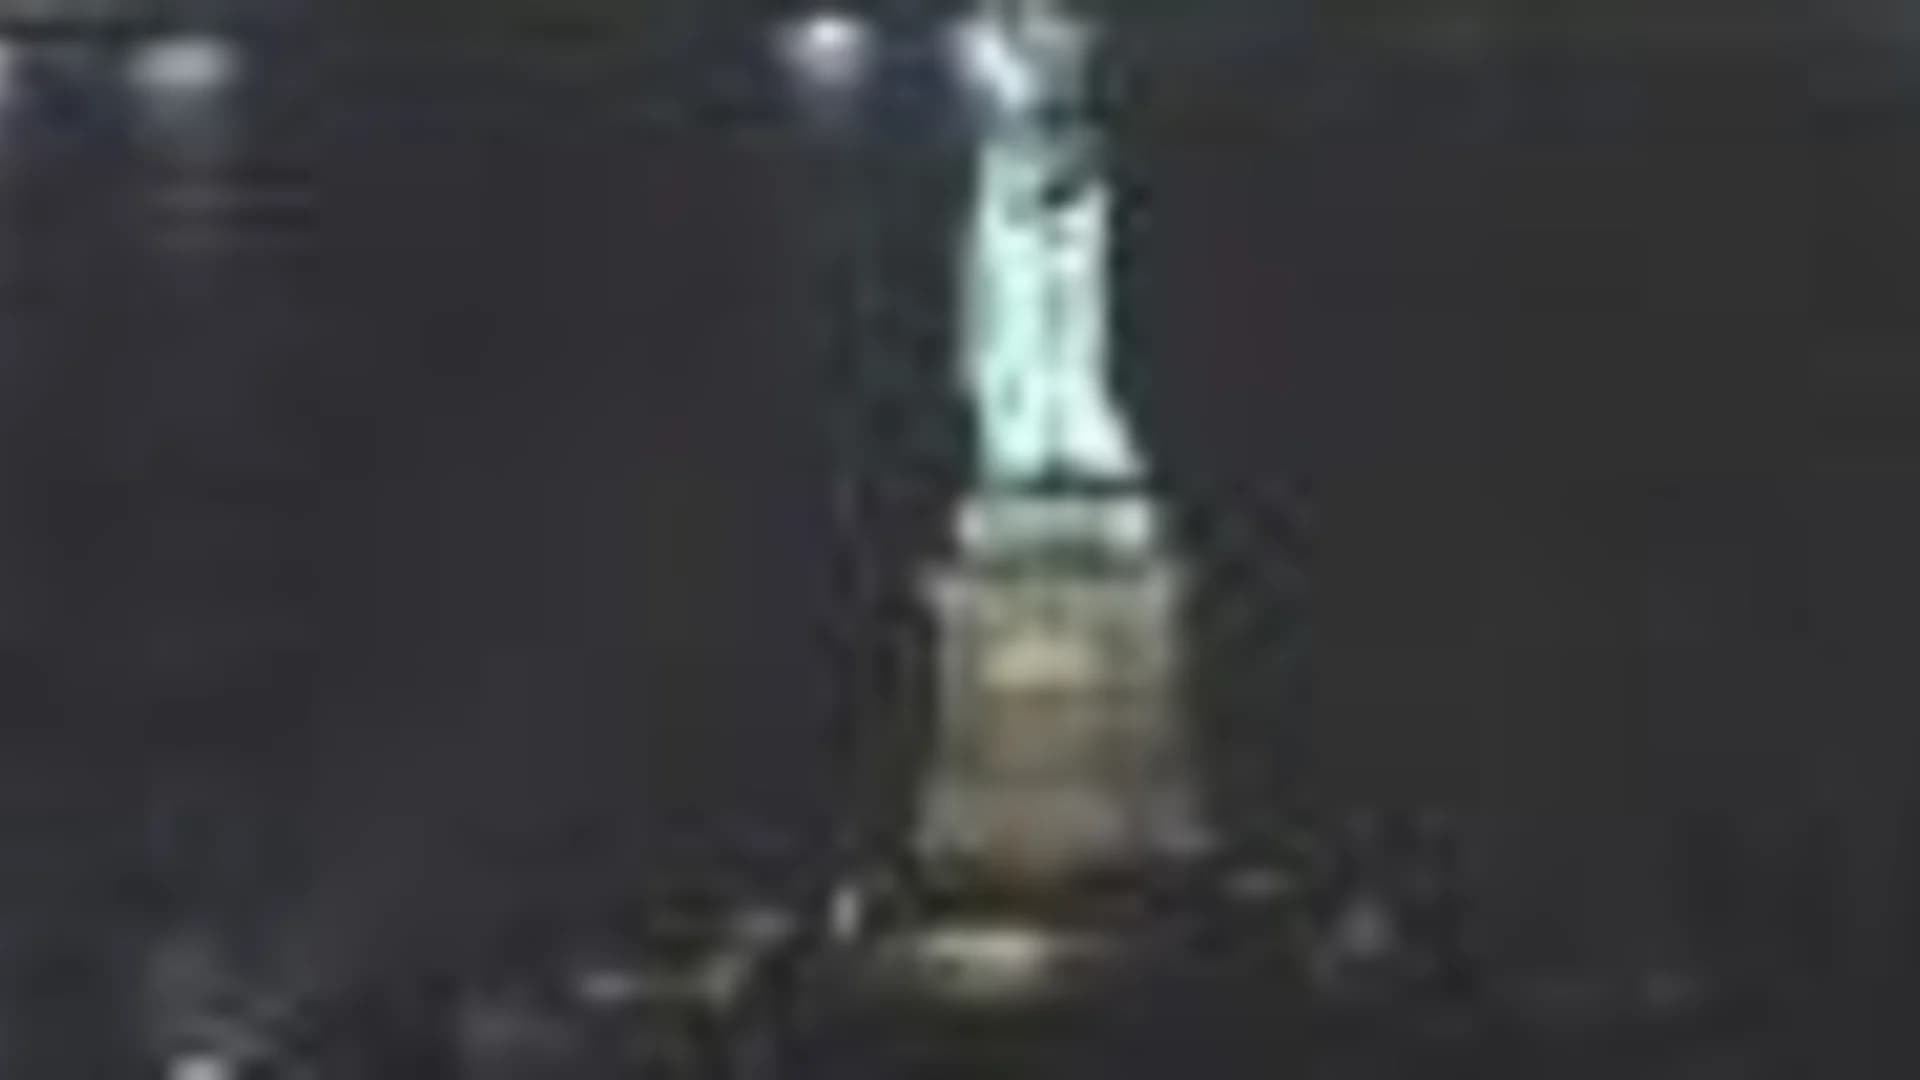 Lights out at Statue of Liberty for several hours